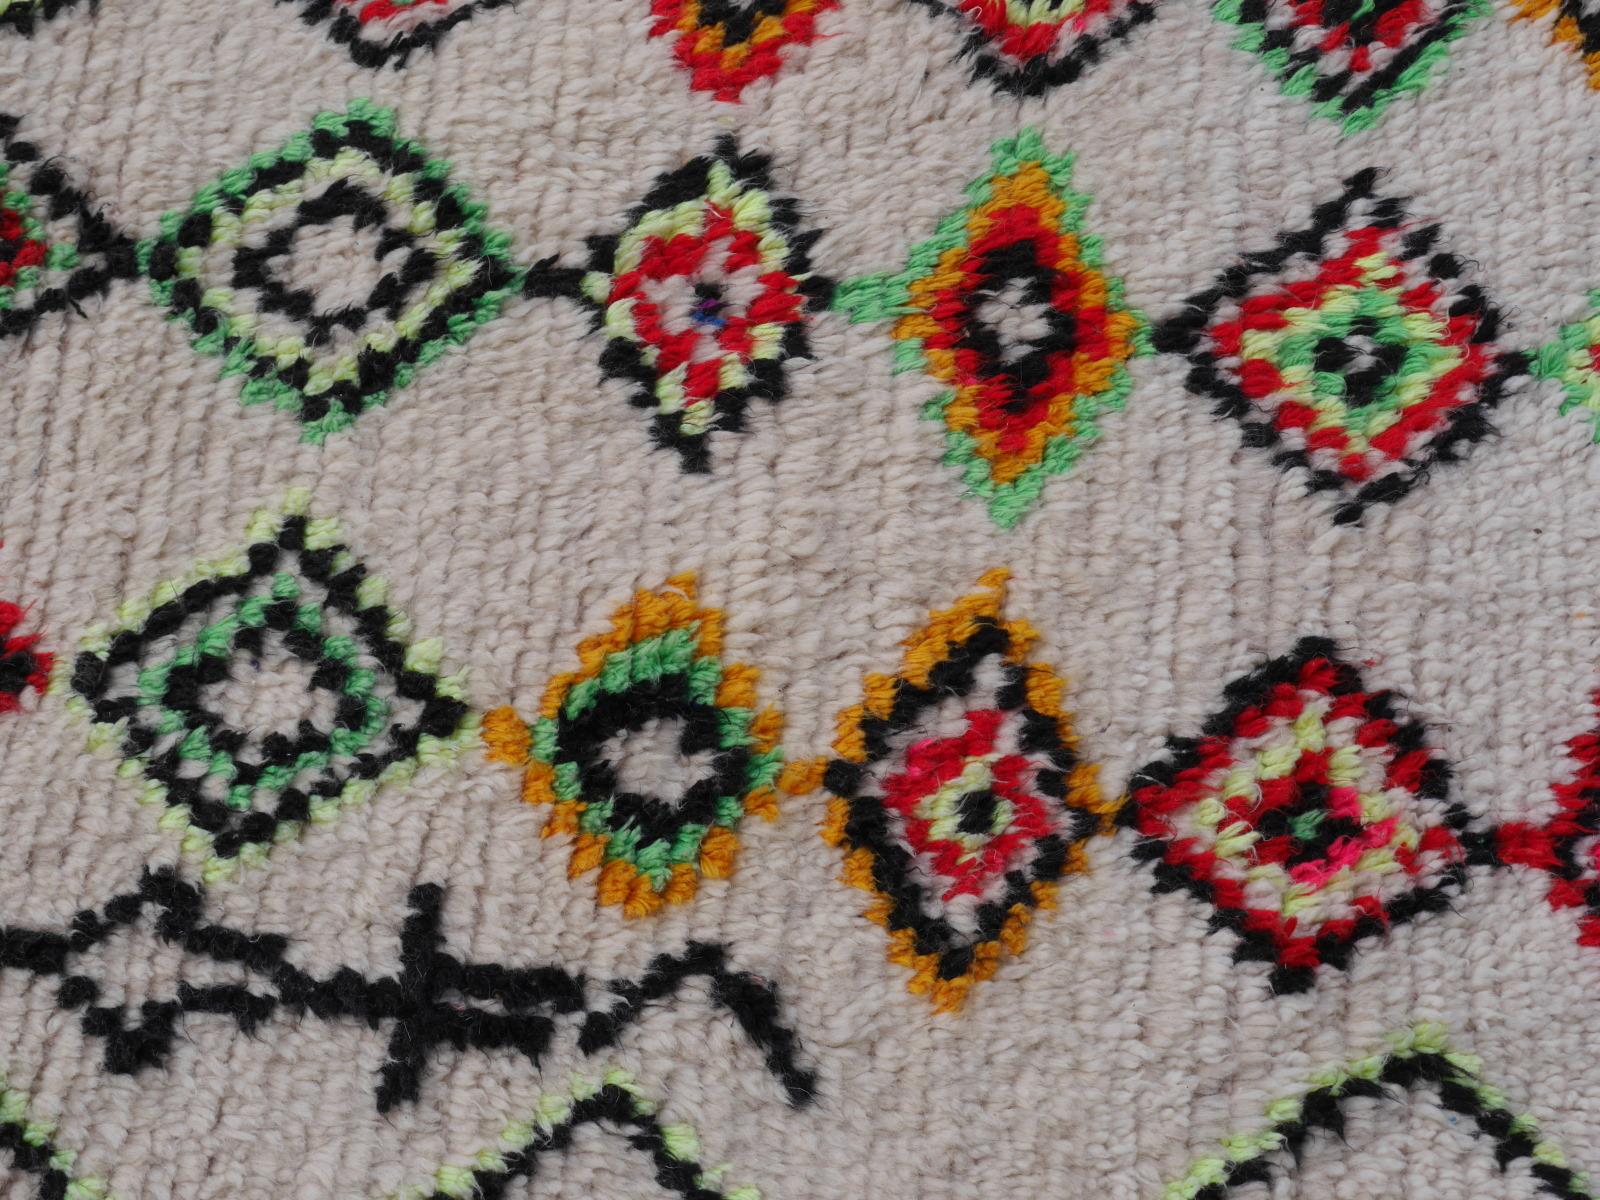 Berber rugs and carpets are mainly made in Morocco, Tunesia and Algeria. Largest producer are the tribal and nomadic Berber people of Morocco. Different areas produce very beautiful works of art. The Azilal are famous for their thick white wool rugs